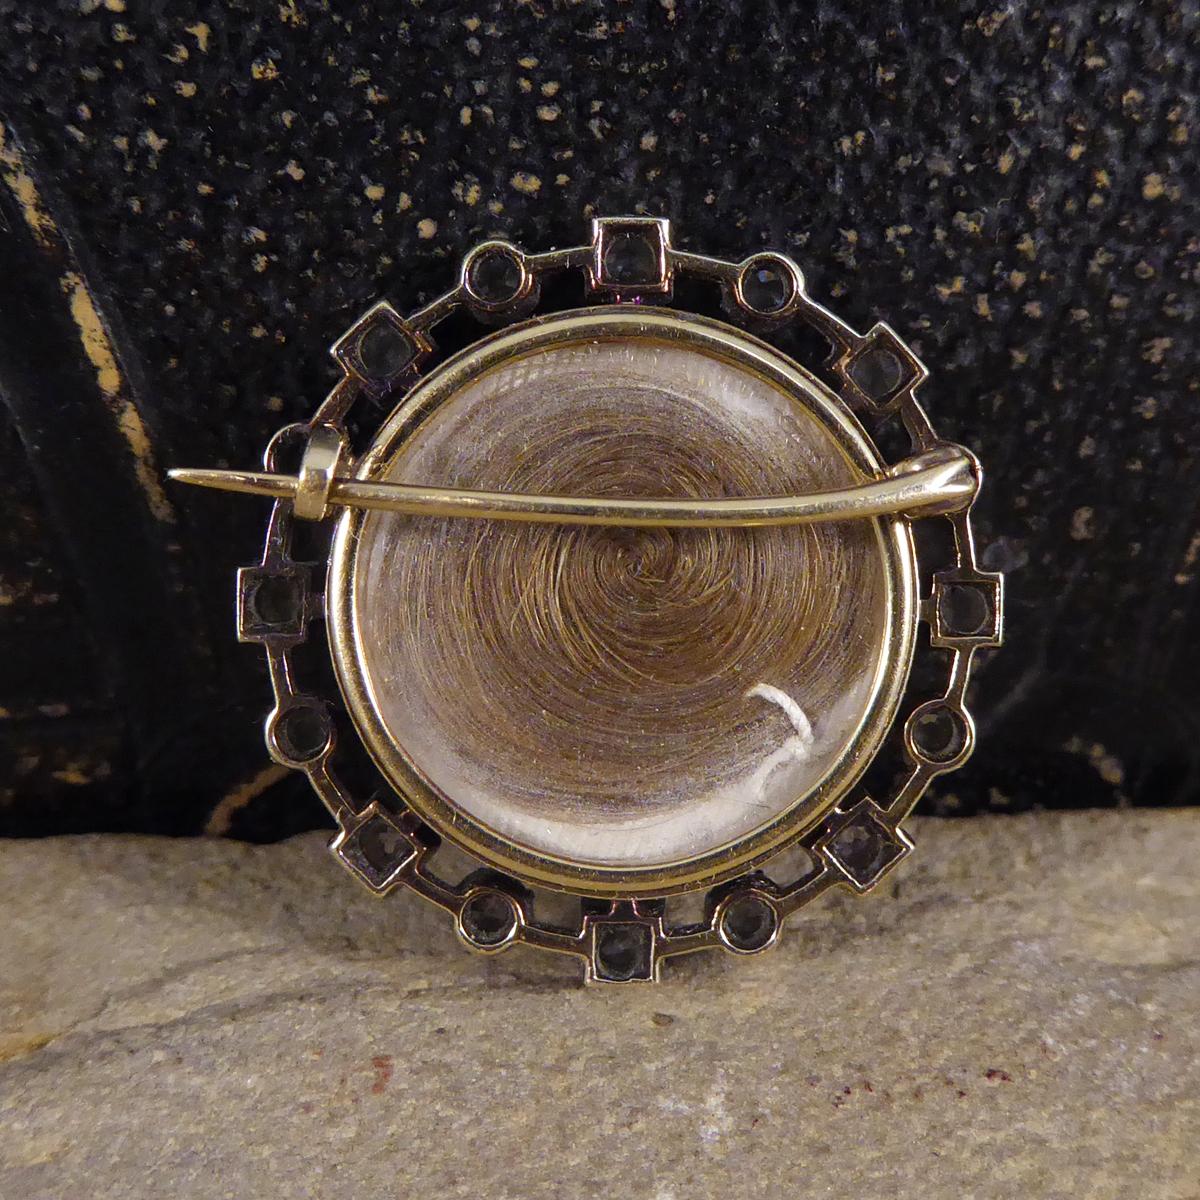 Victorian Quality Antique Enamel Mourning Brooch Mounted in Gold and Silver in Antique Box